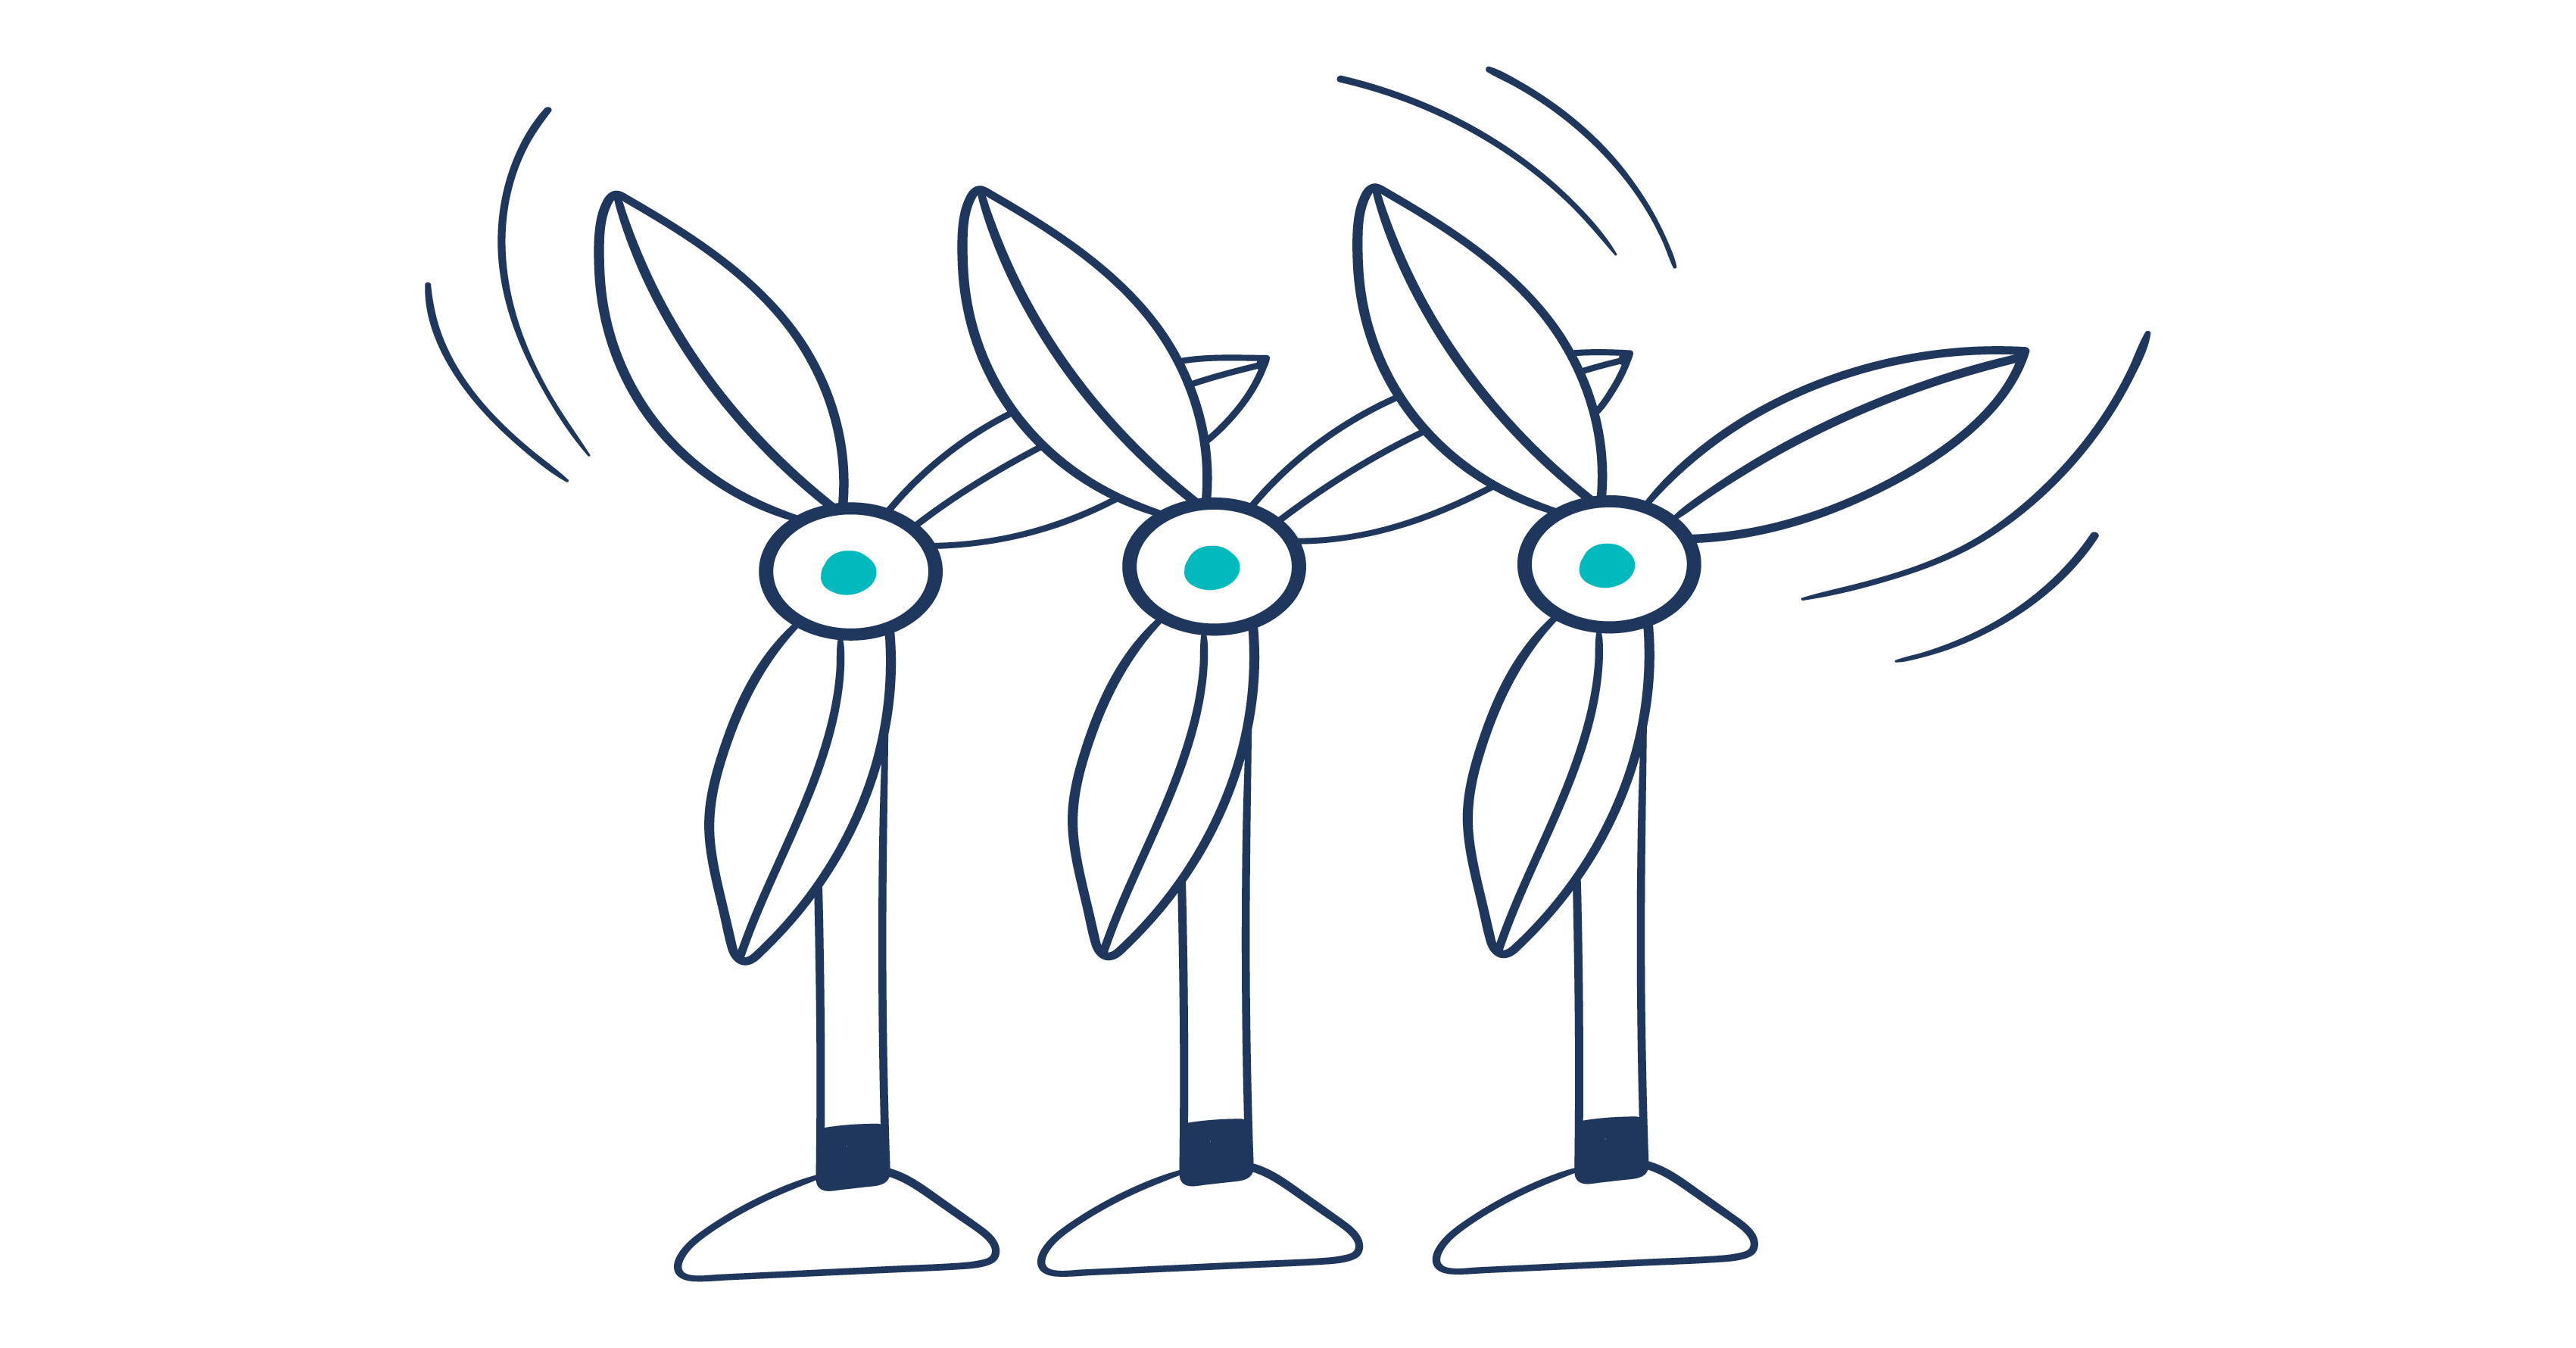 The image shows an illustration of three wind turbines